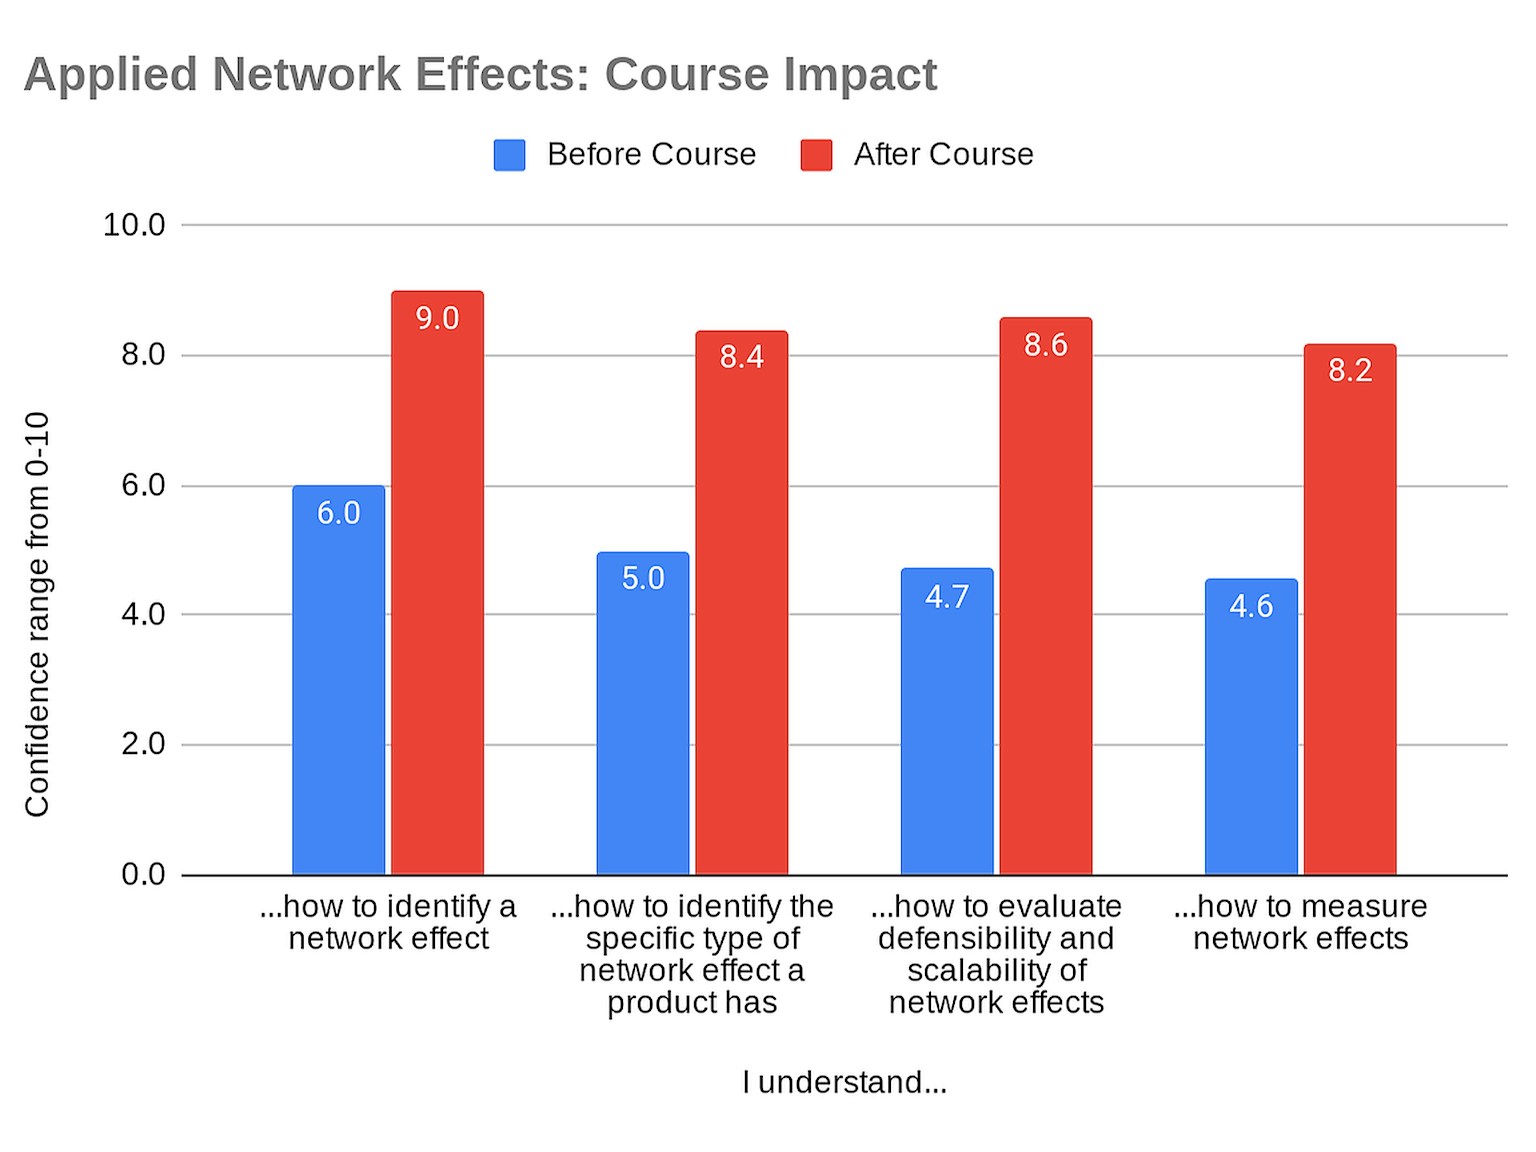 Participants saw marked improvements in their ability to identify, assess & measure network effects.